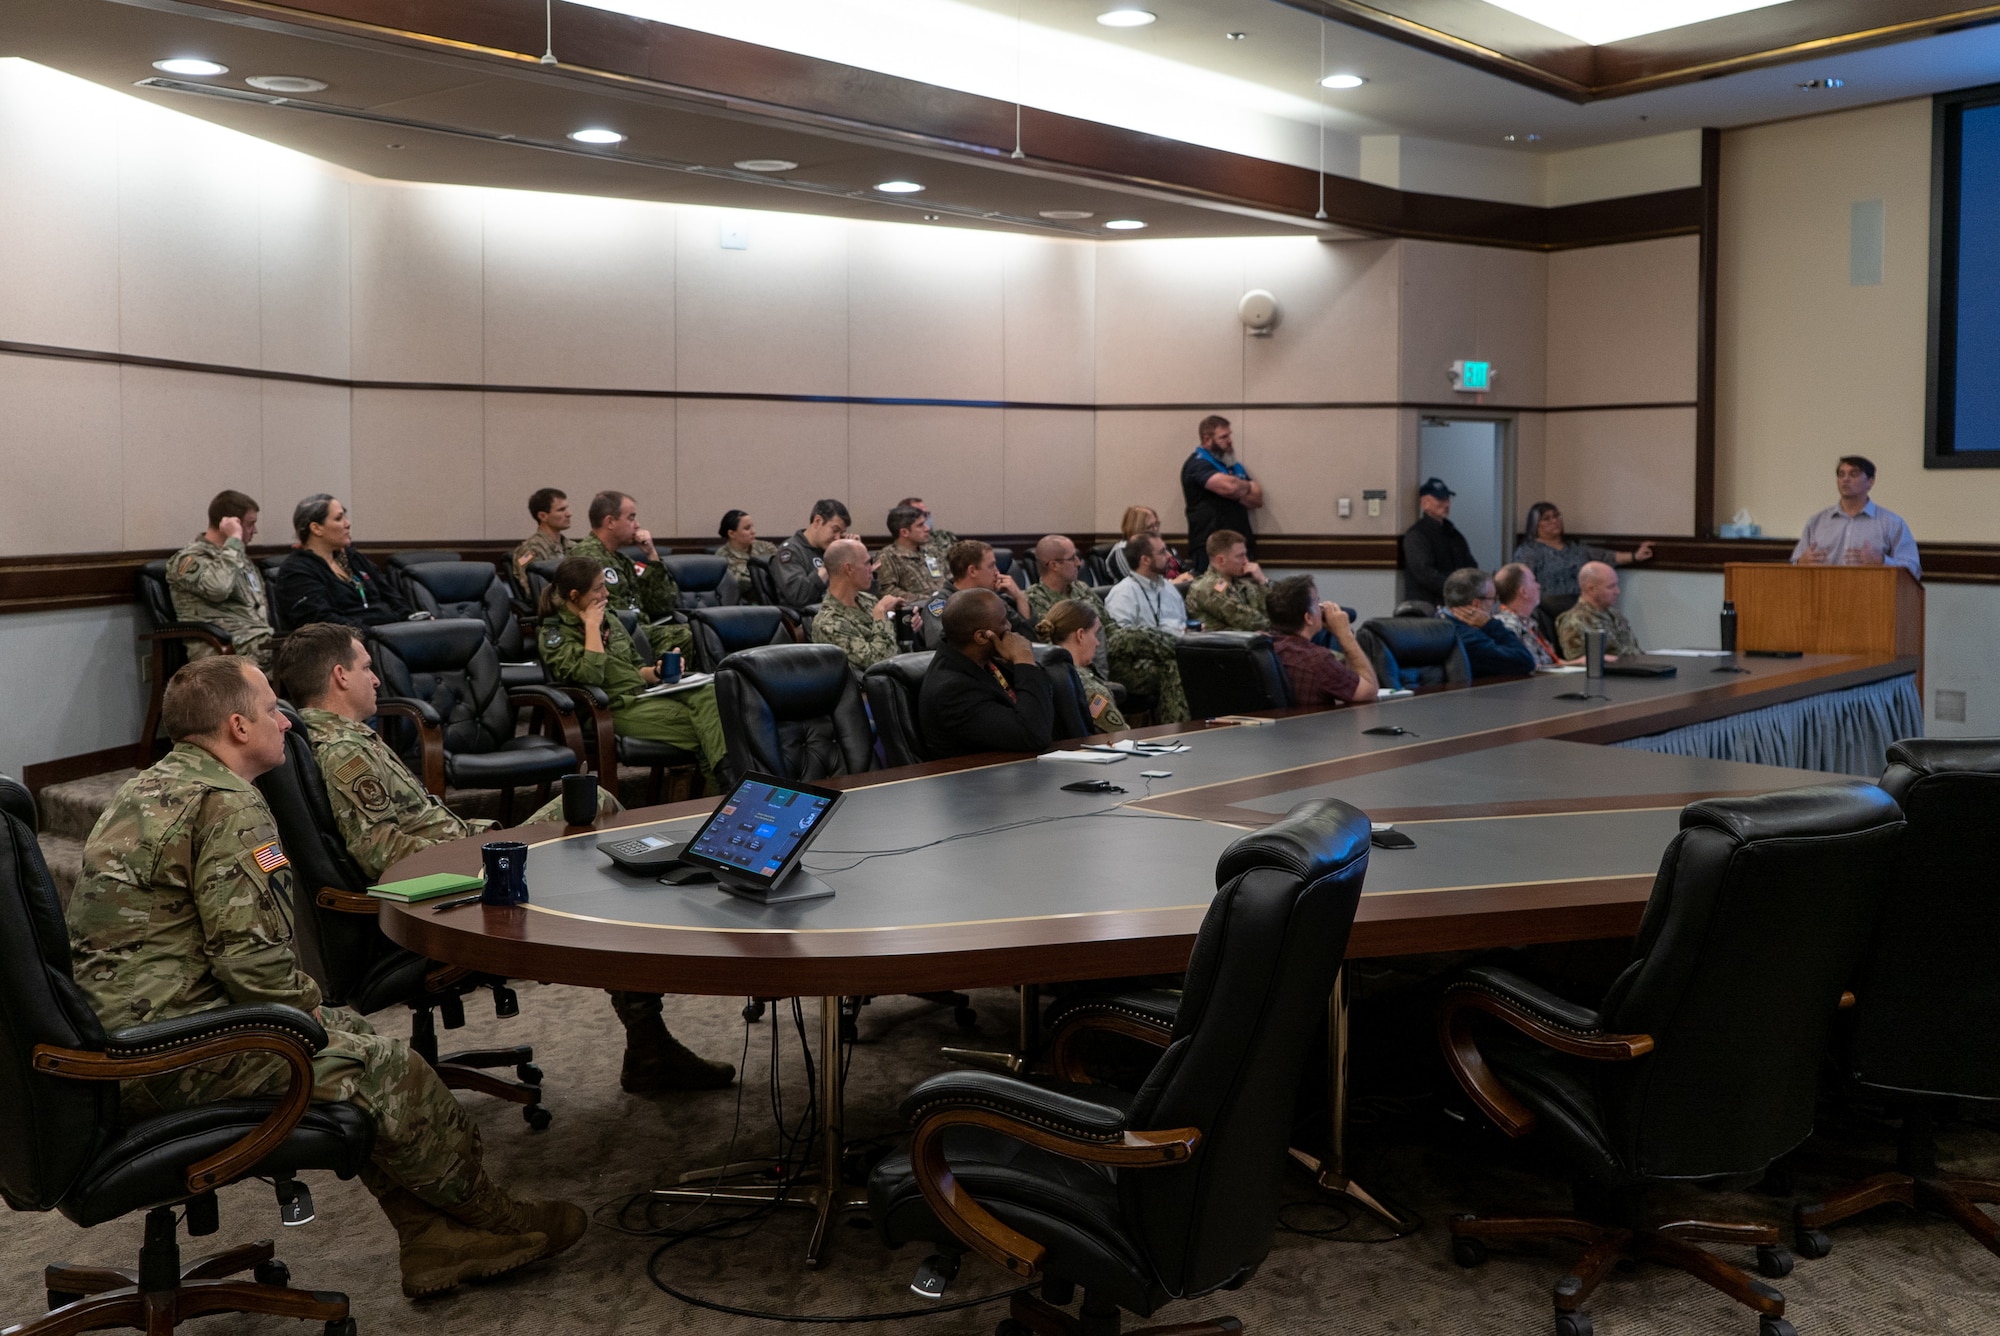 Alaskan Command staff and other participants of Arctic Resolve 2022 look towards the current speaker at the podium during the event in the Reeve's Conference Room.